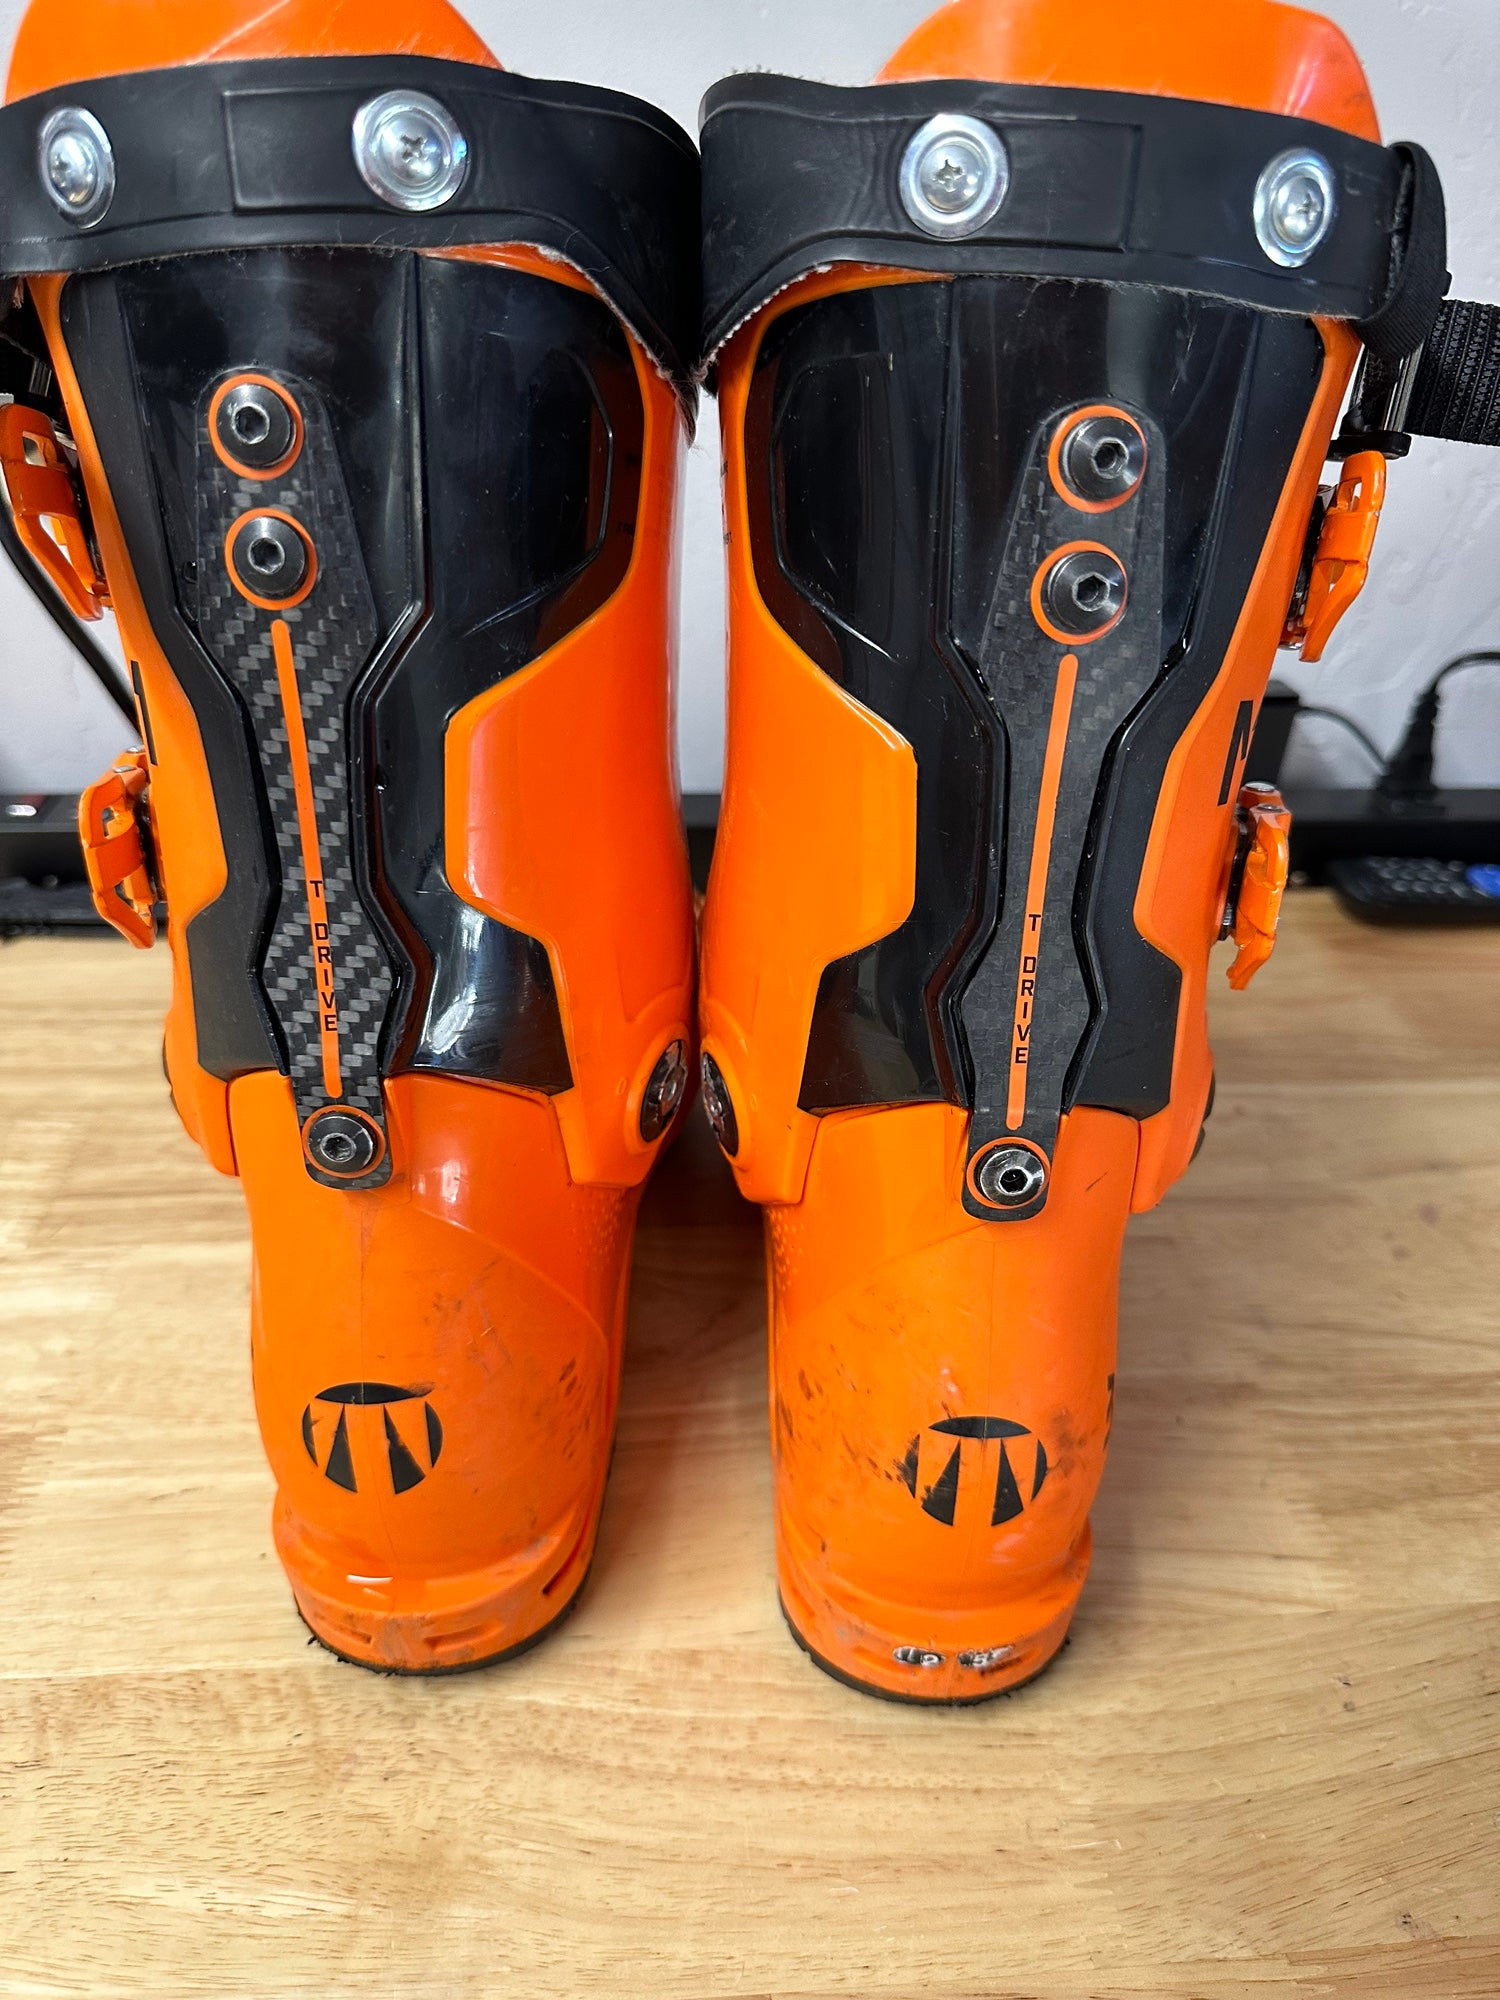 2023 Used Tecnica Mach 1 LV 130 Ski Boots and New Liners - 26.5